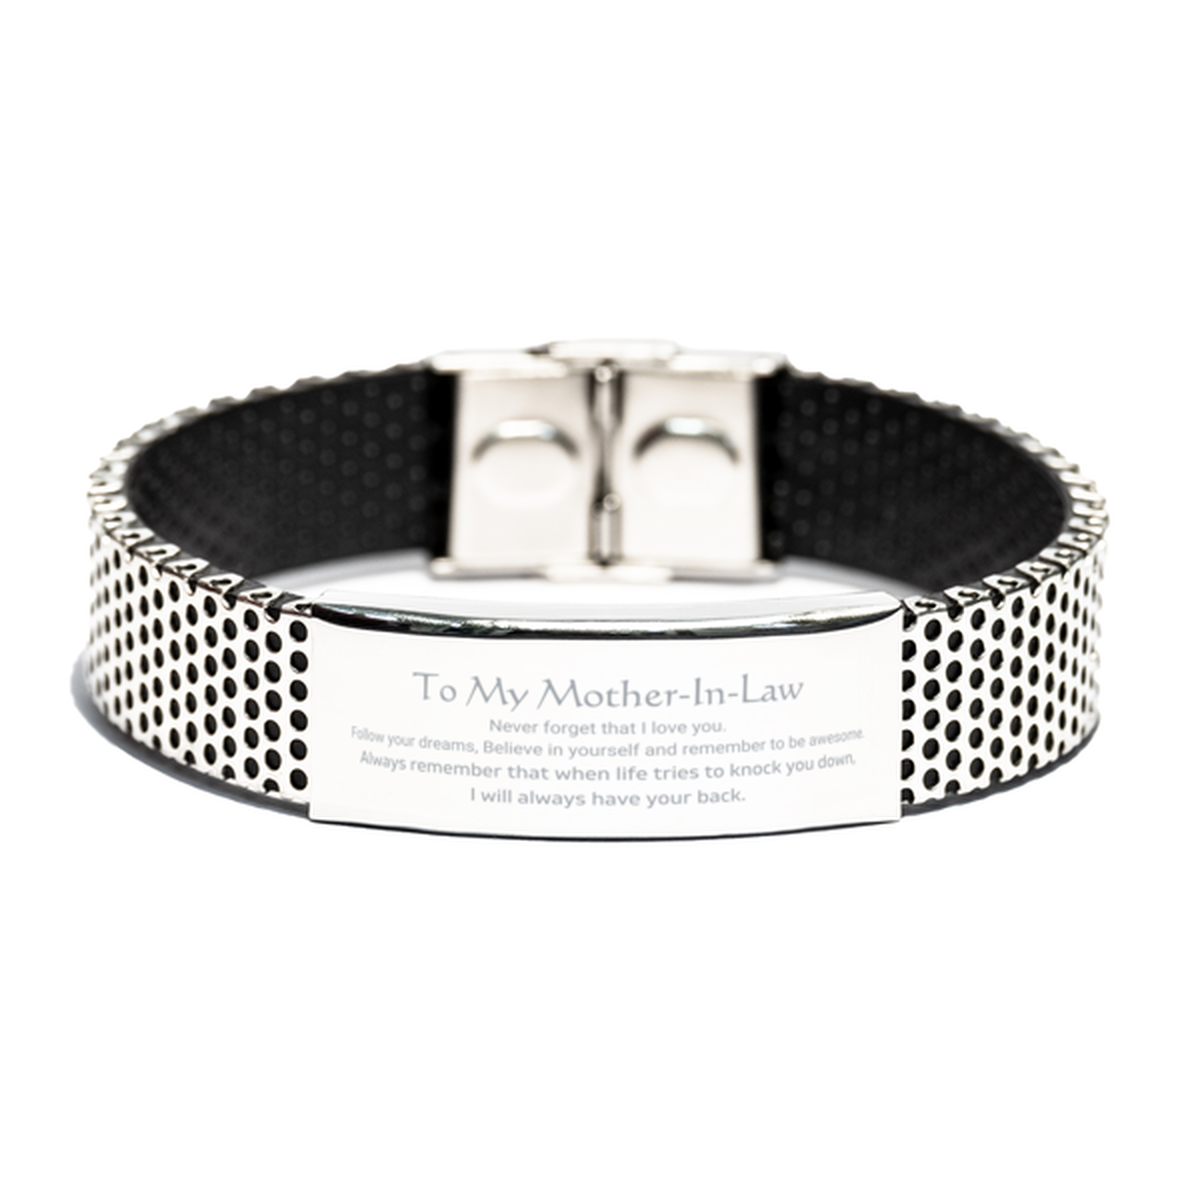 Inspirational Gifts for Mother-In-Law, Follow your dreams, Believe in yourself, Mother-In-Law Stainless Steel Bracelet, Birthday Christmas Unique Gifts For Mother-In-Law